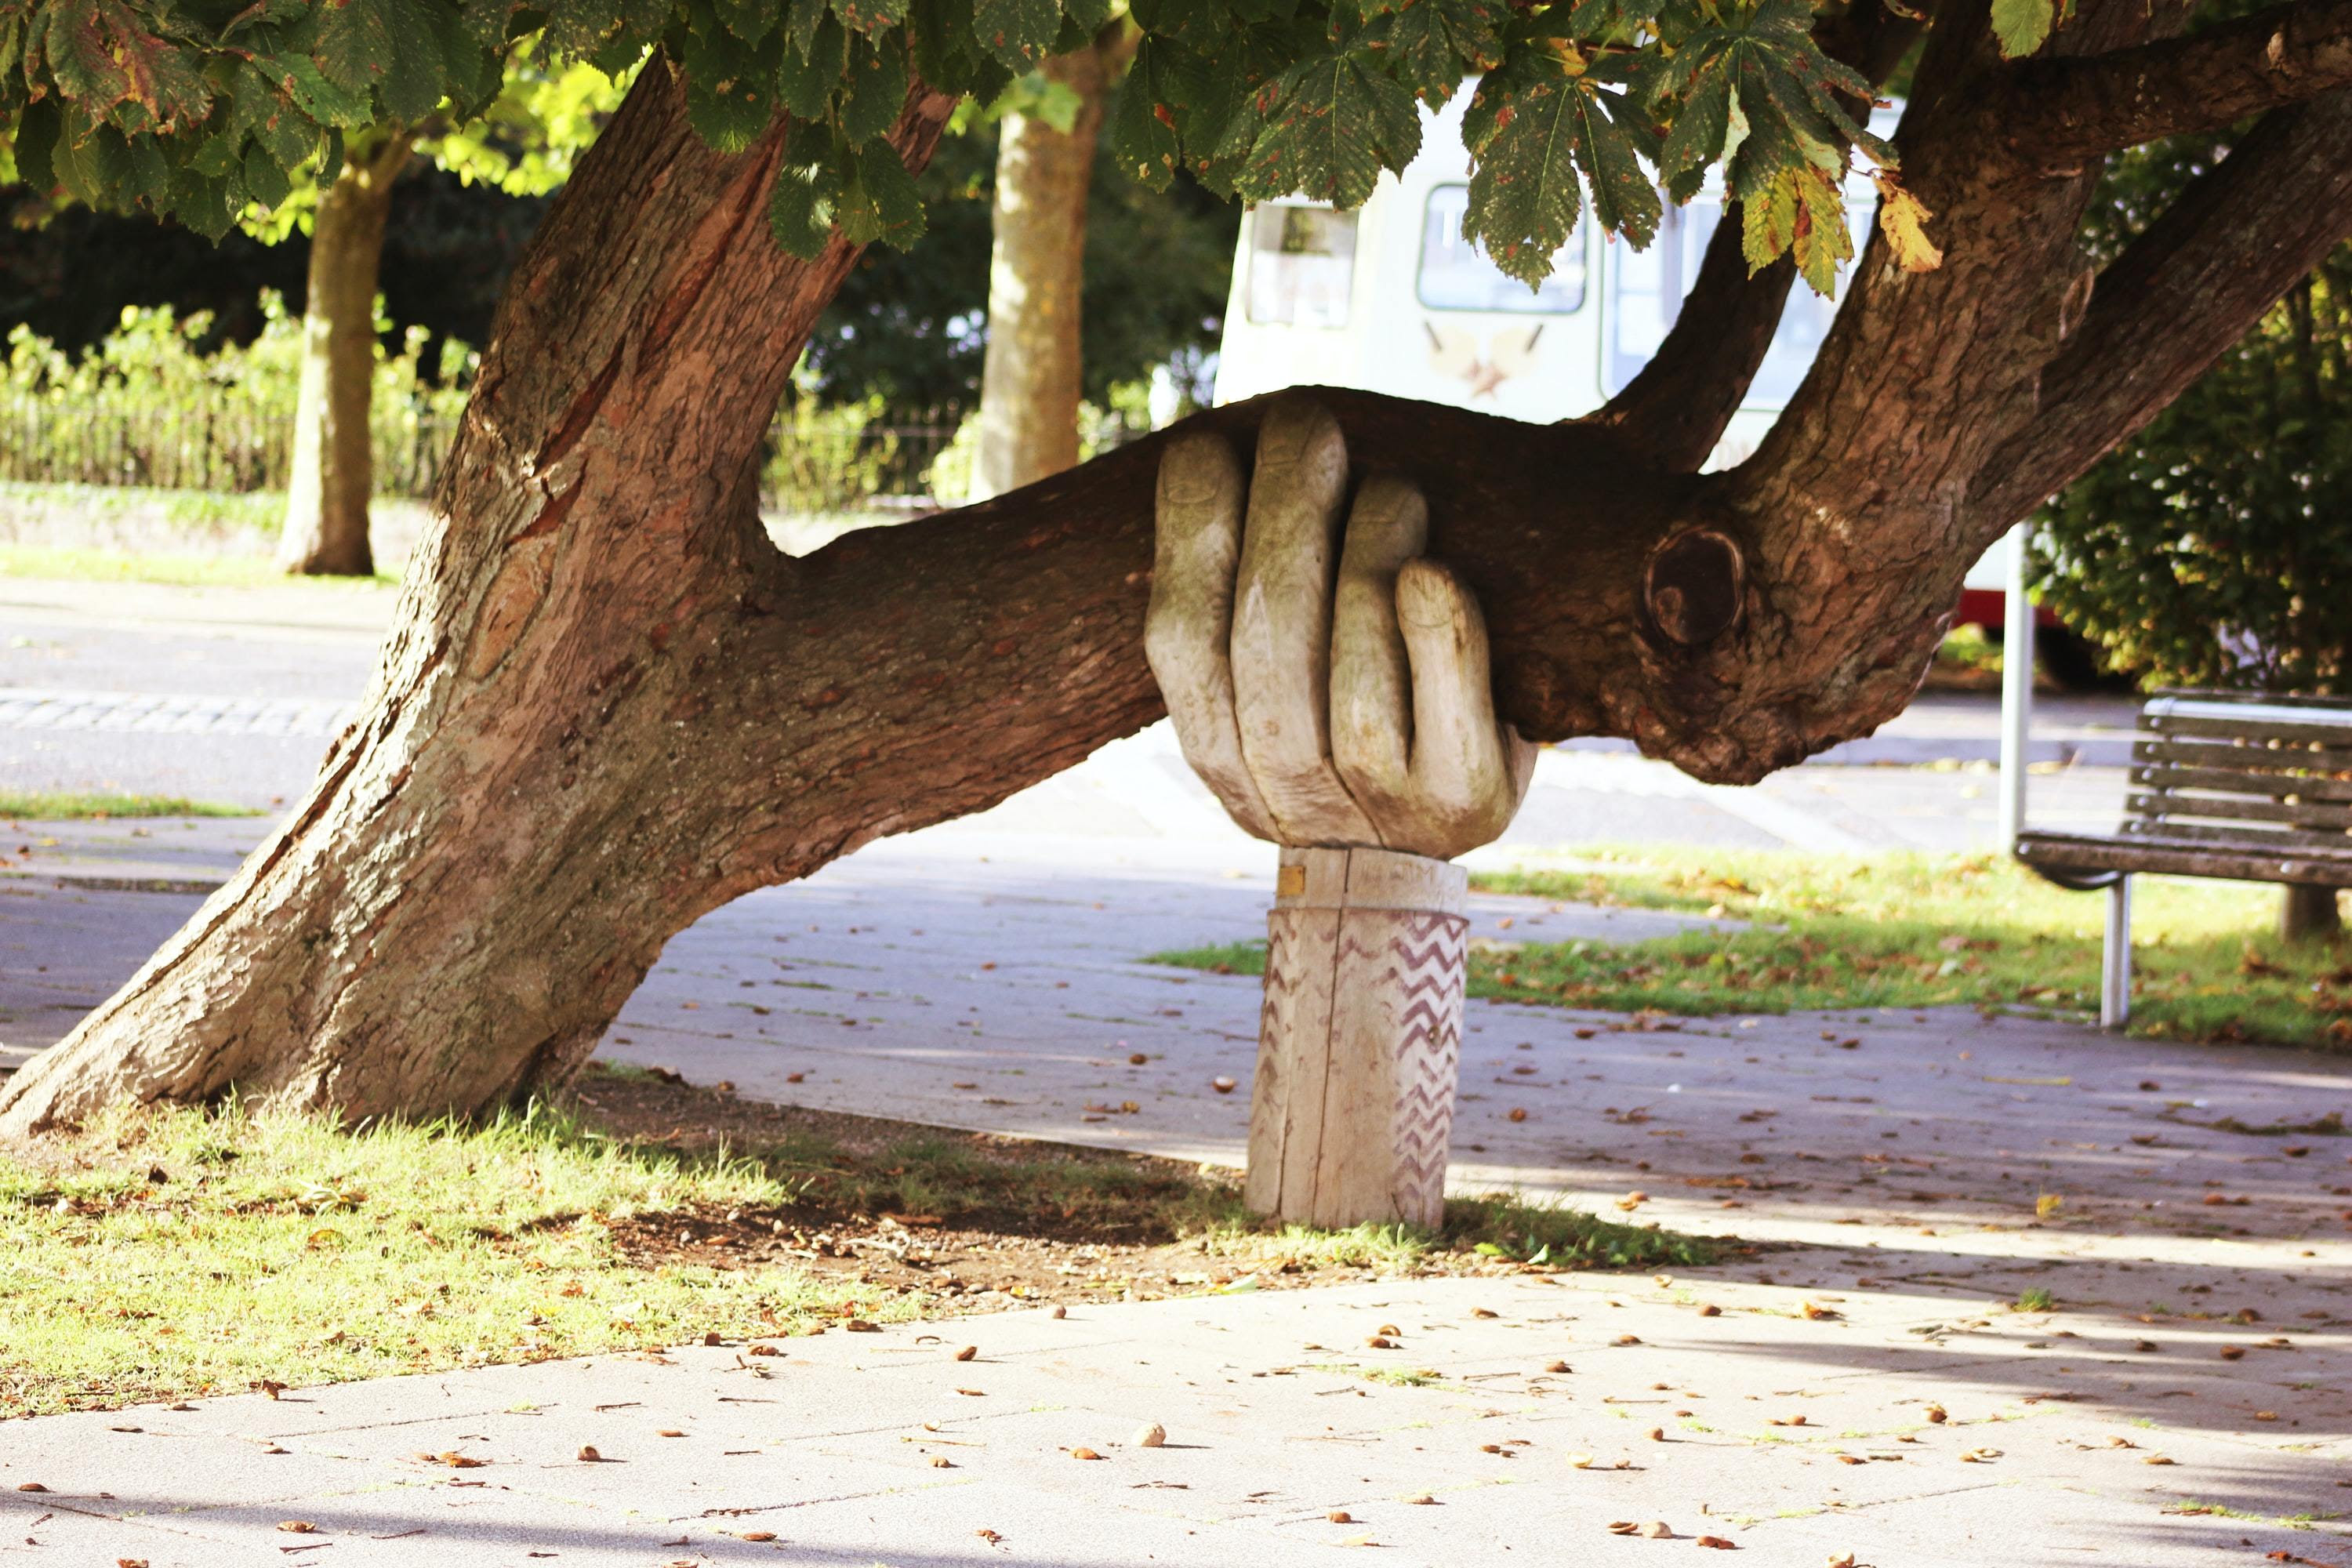 Photo of an old, leaning tree supported by a wooden sculpture of a hand.